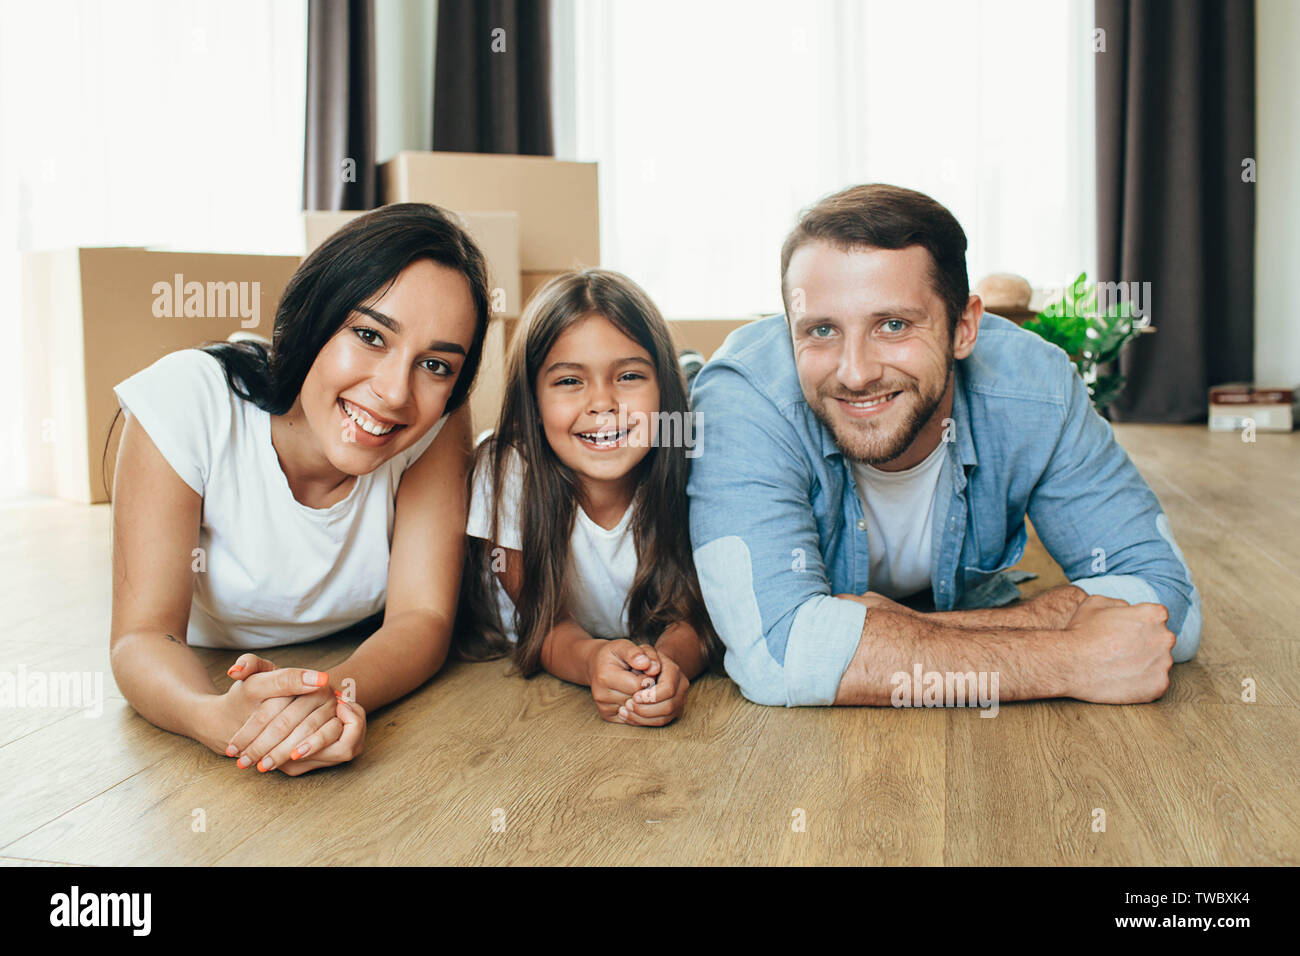 Happy family moving in new house. Mother, father and daughter together smiling lying down on floor with boxes on background Stock Photo